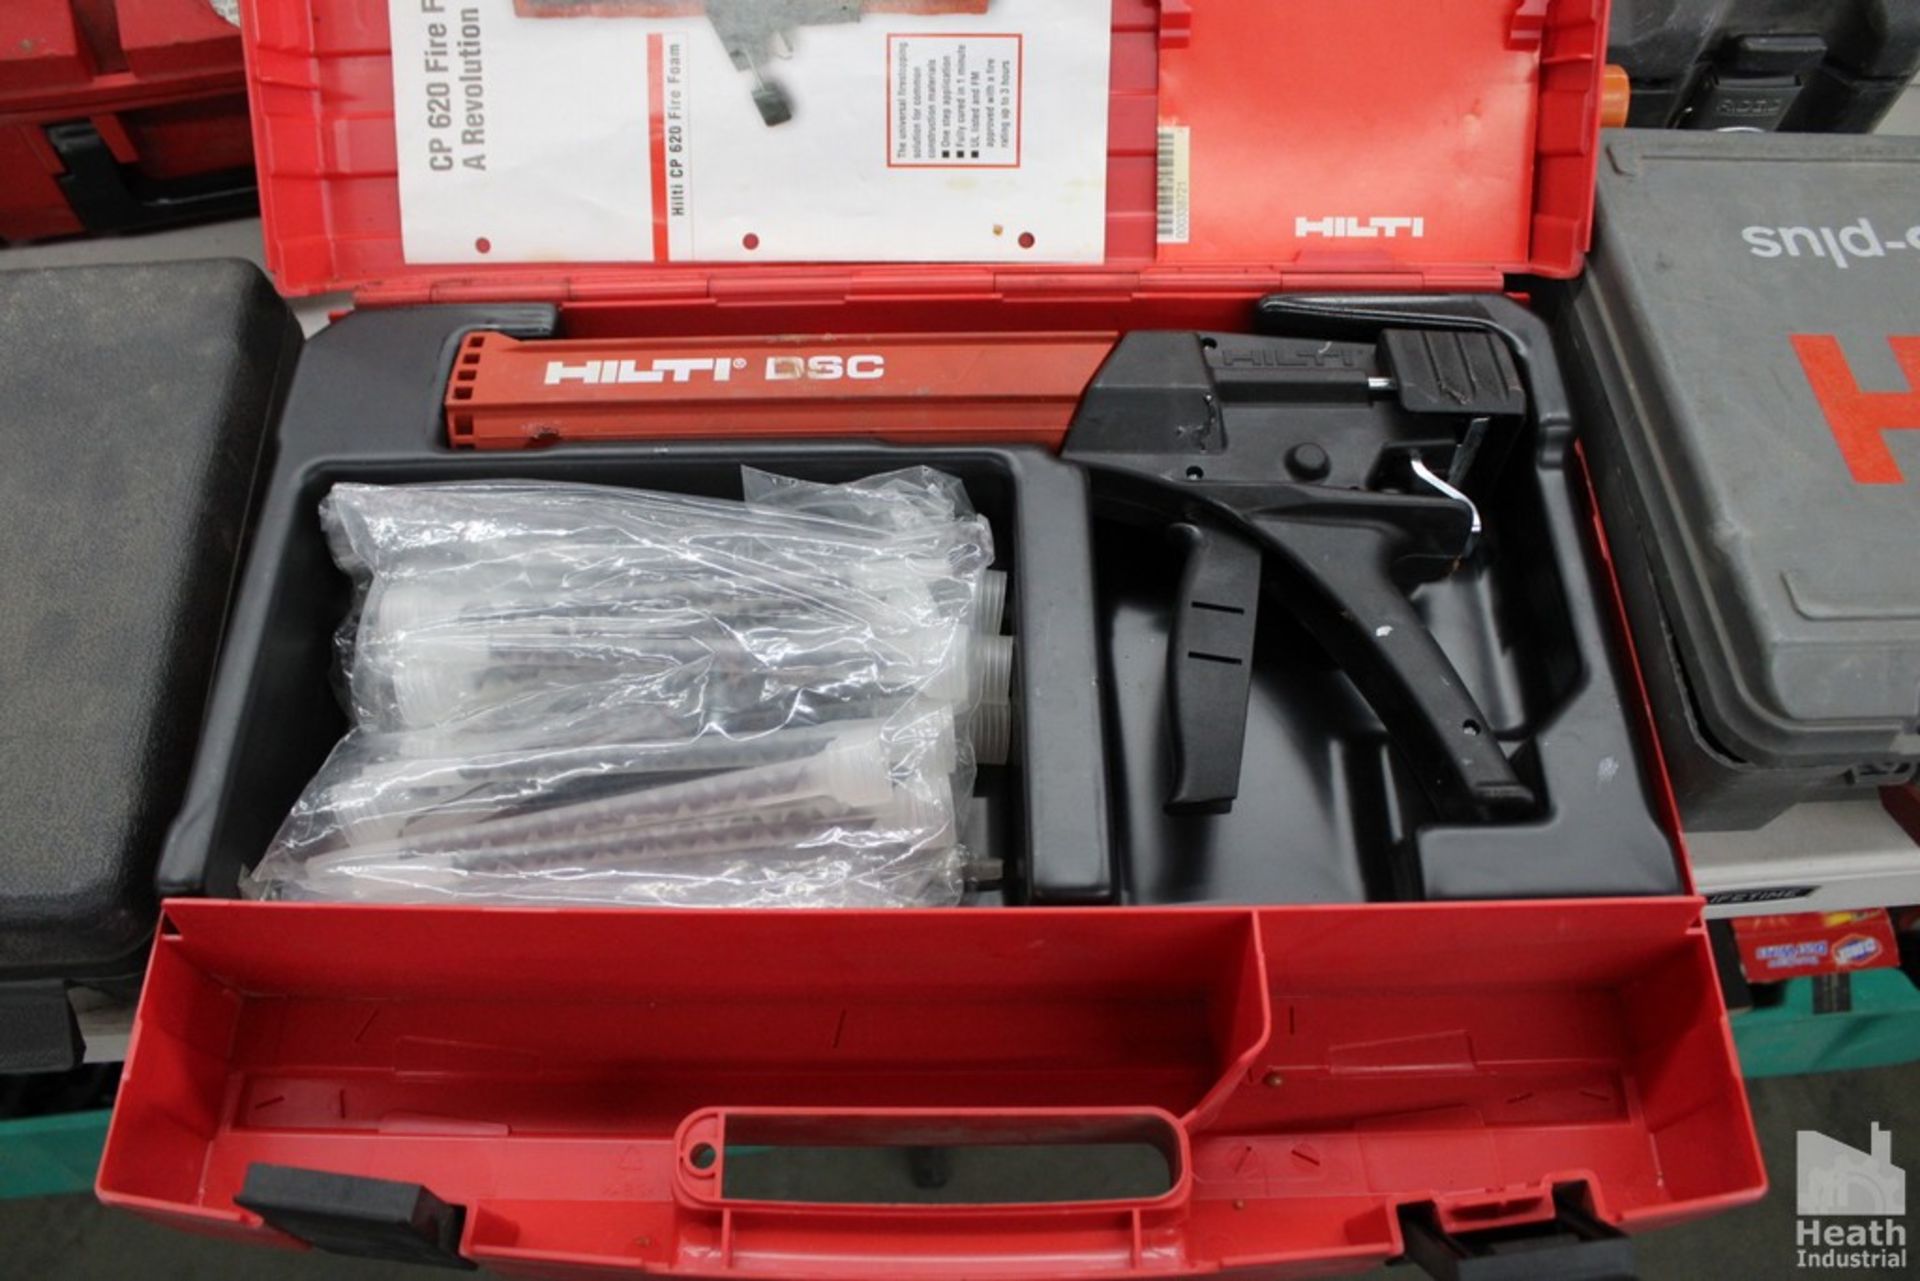 HILTI DSC FIRESTOP AND FIRE PROTECTION DISPENSER, WITH CASE